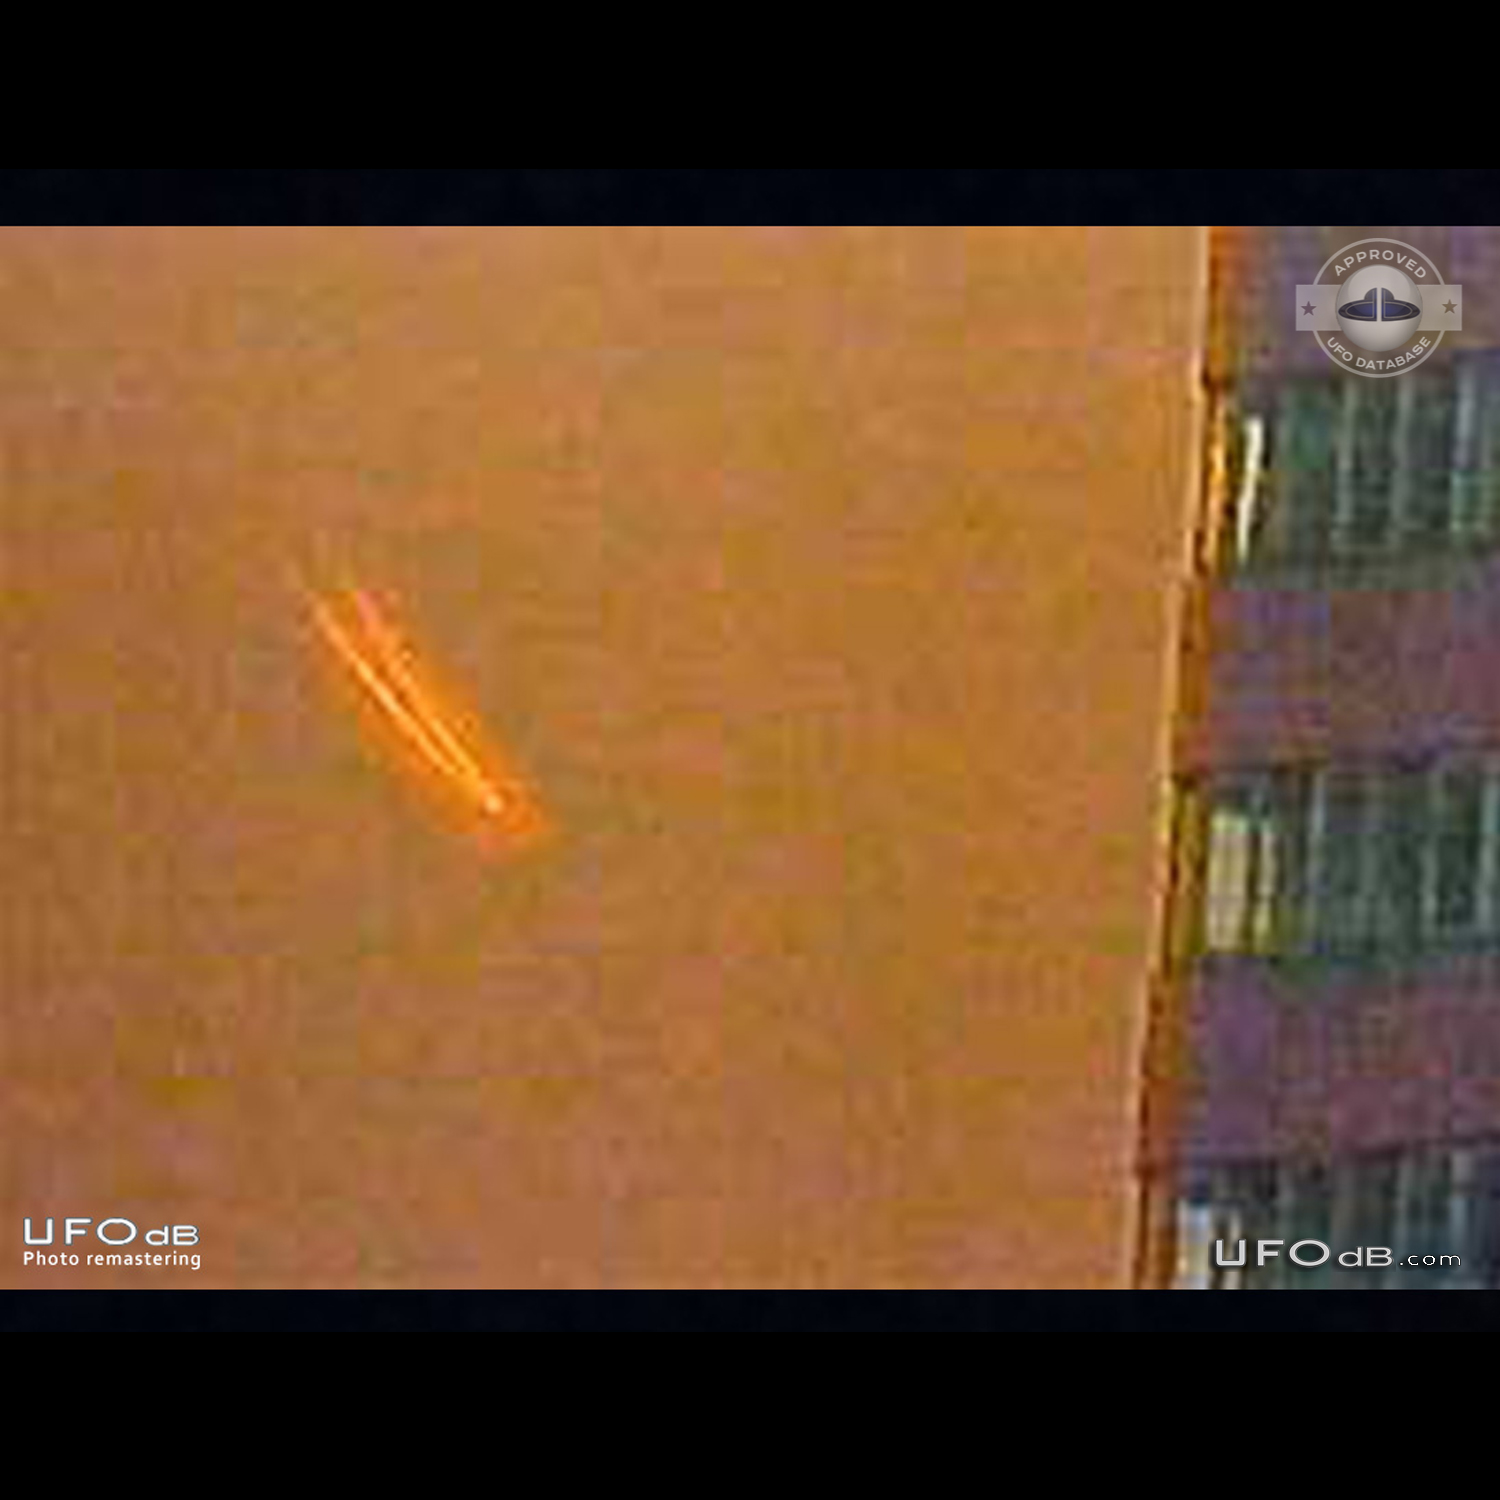 Thousands of people in Shanghai China saw a UFO with an Orange Tail UFO Picture #842-4